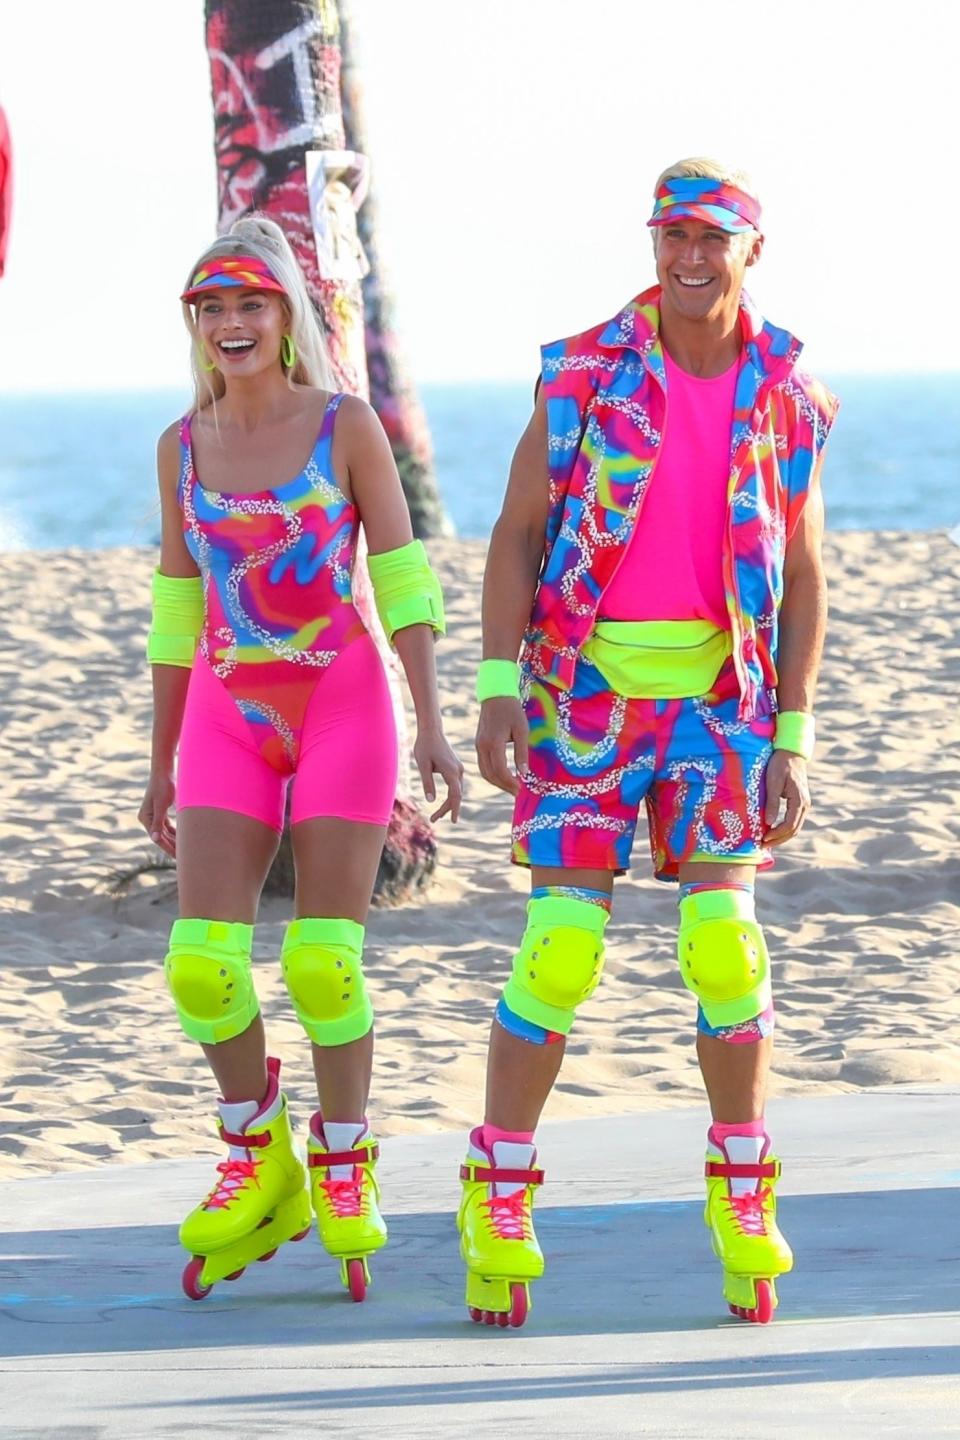 Ryan and Margot wearing matching outfits with bright colors that look like they're from the '80s, as well as matching knee pads and rollerblades